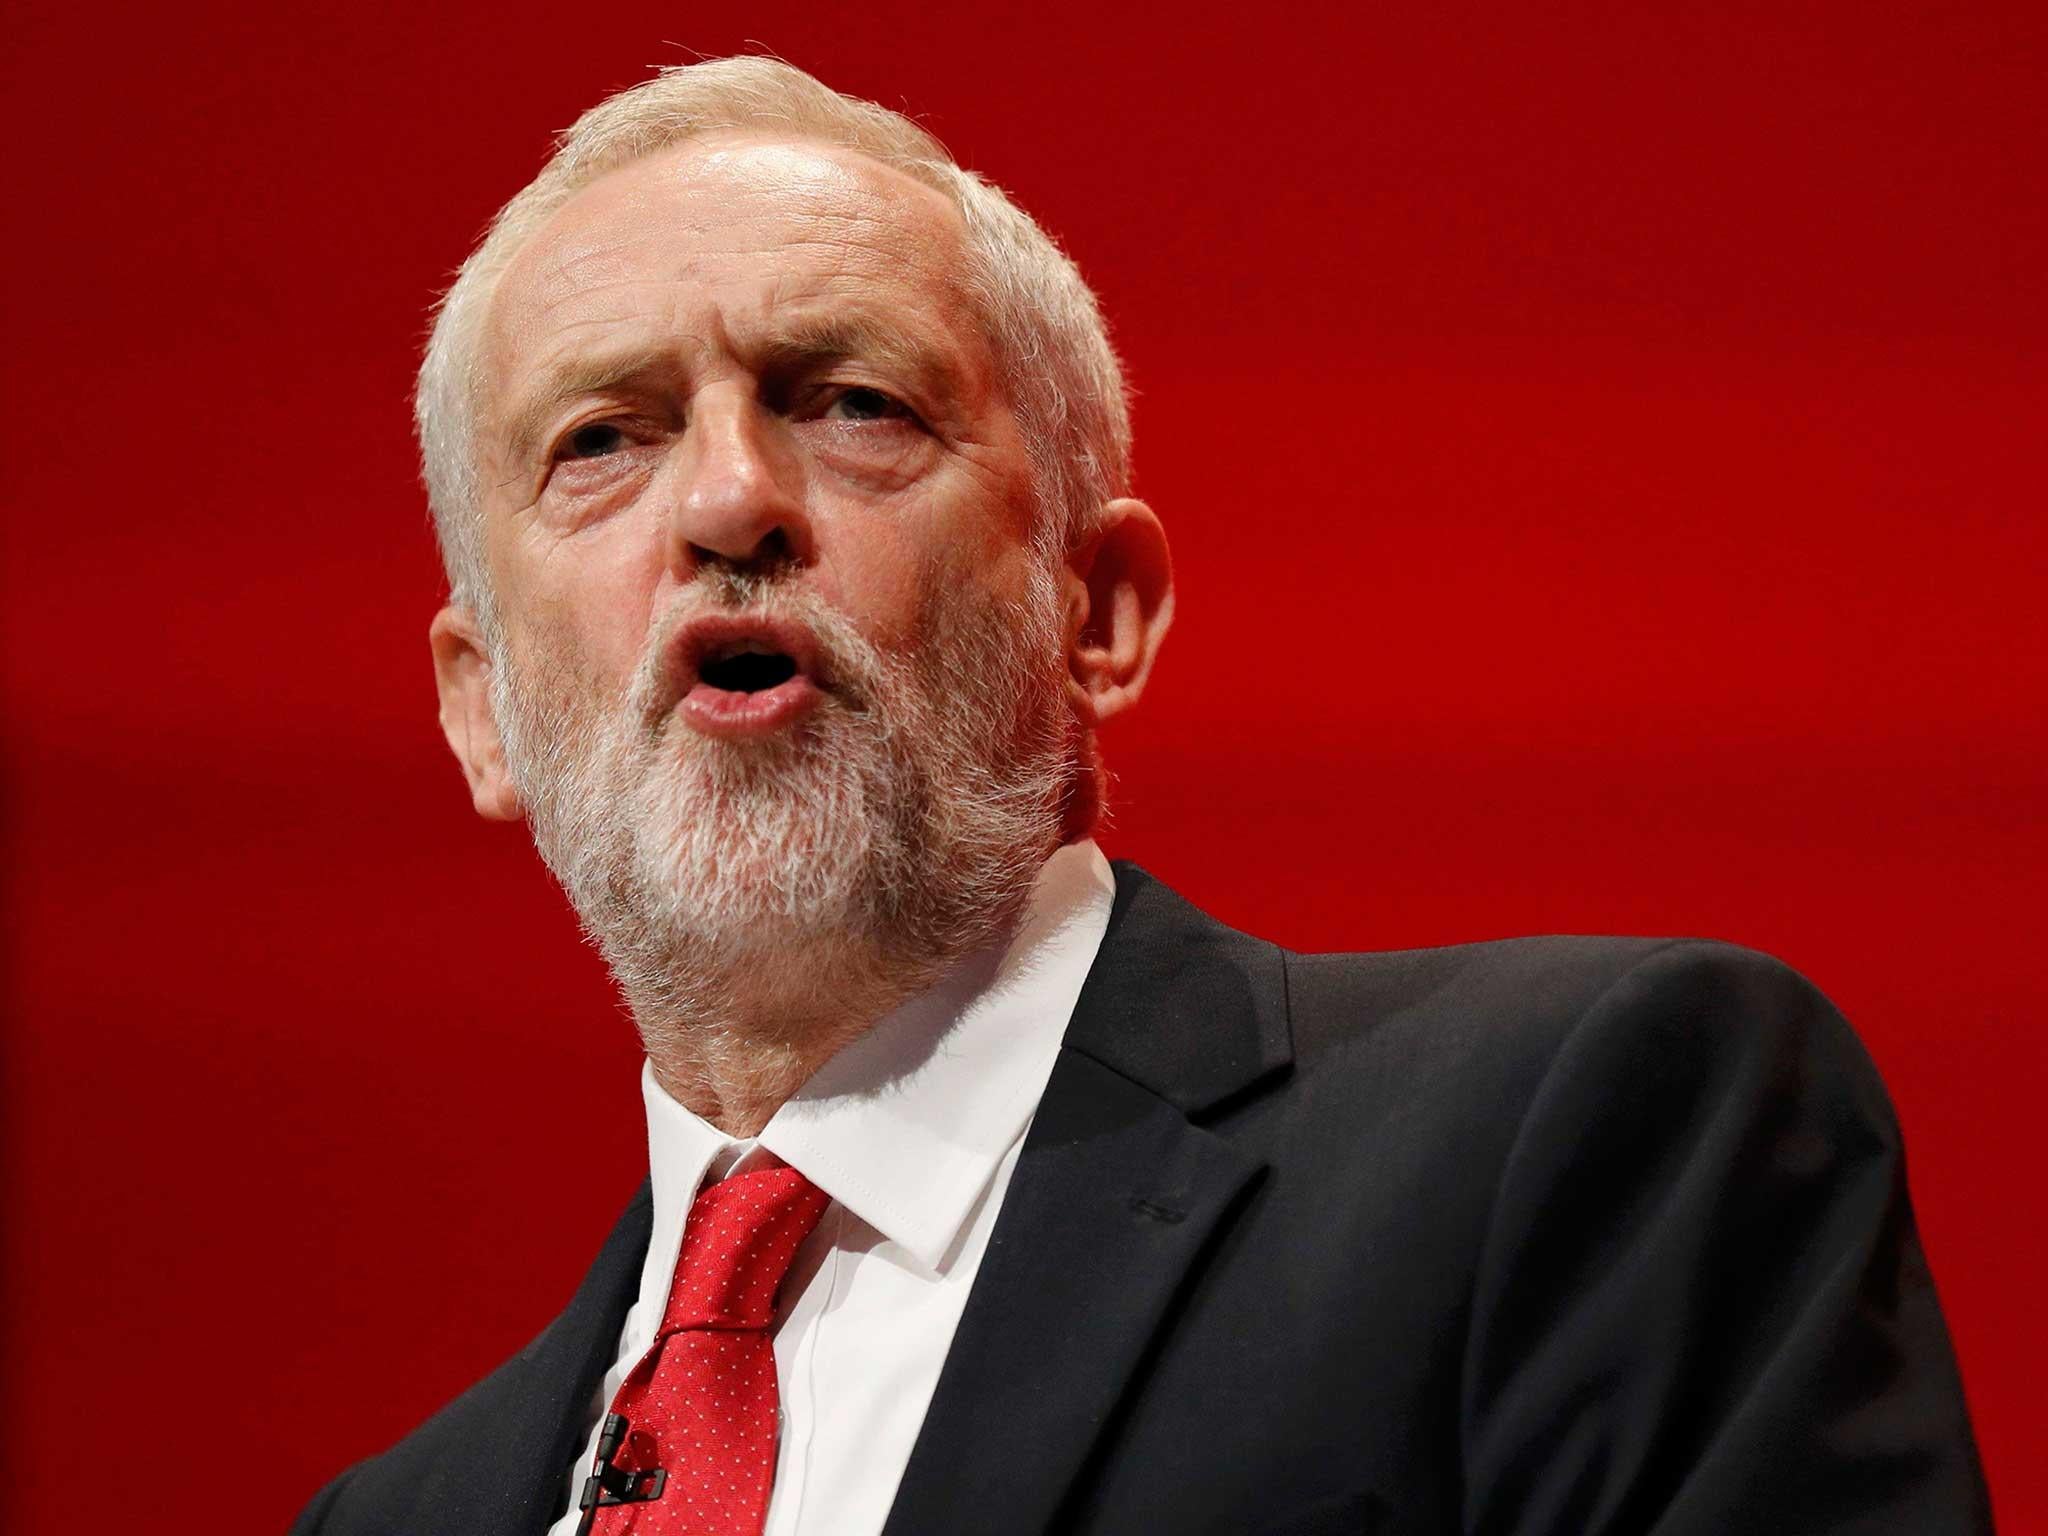 Britain's Labour Party leader Jeremy Corbyn delivers his keynote speech at the Labour Party conference in Liverpool